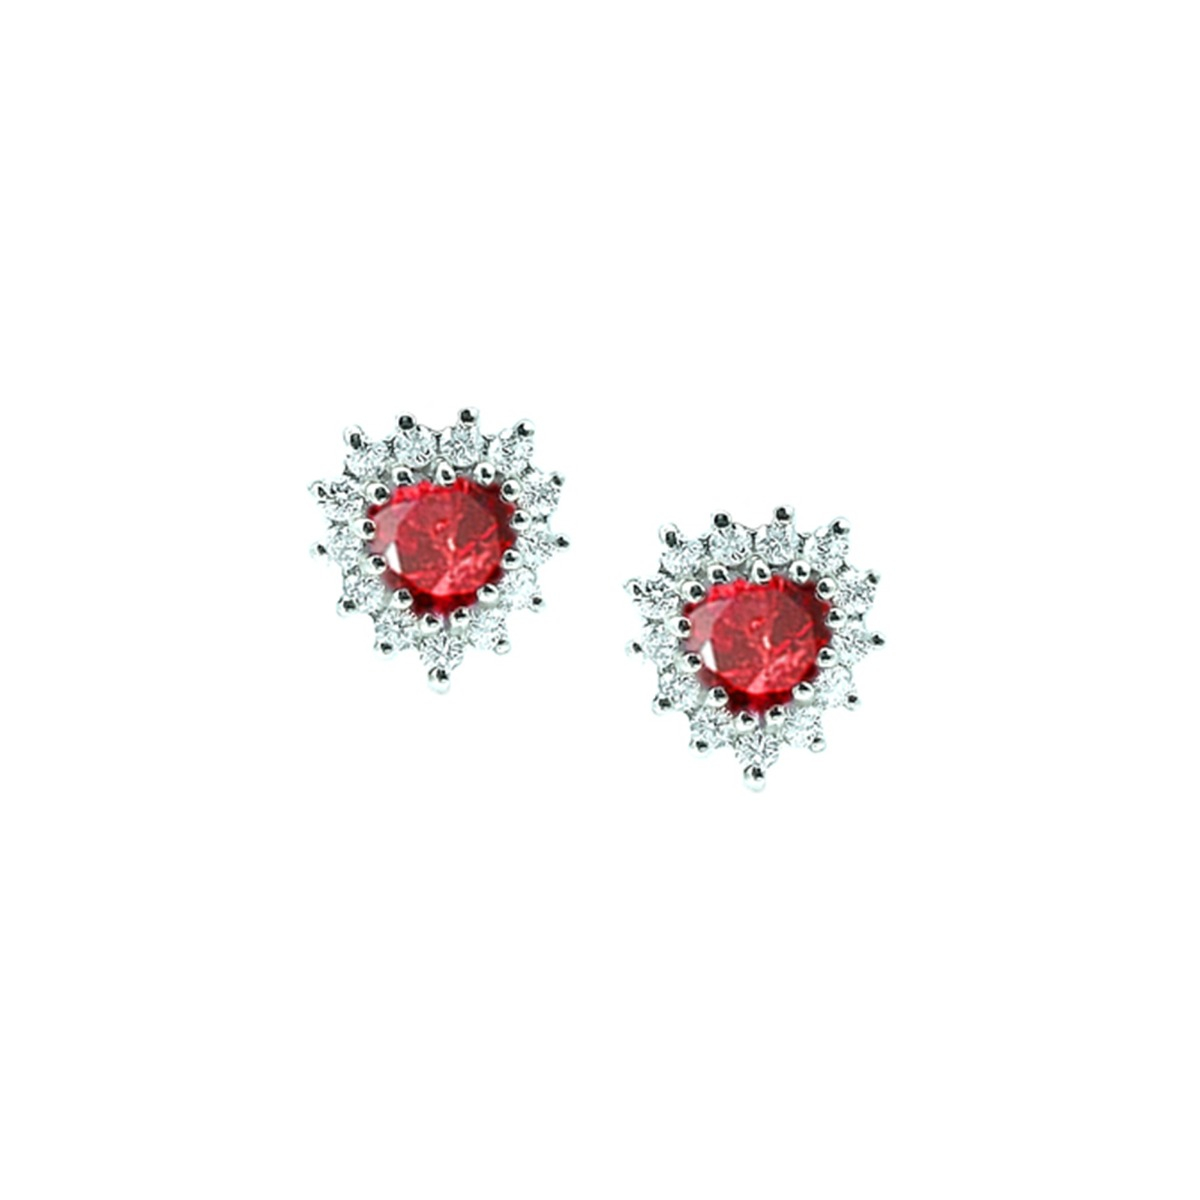 Elegant Earrings In White Gold And Diamonds With Heart-Shaped Ruby